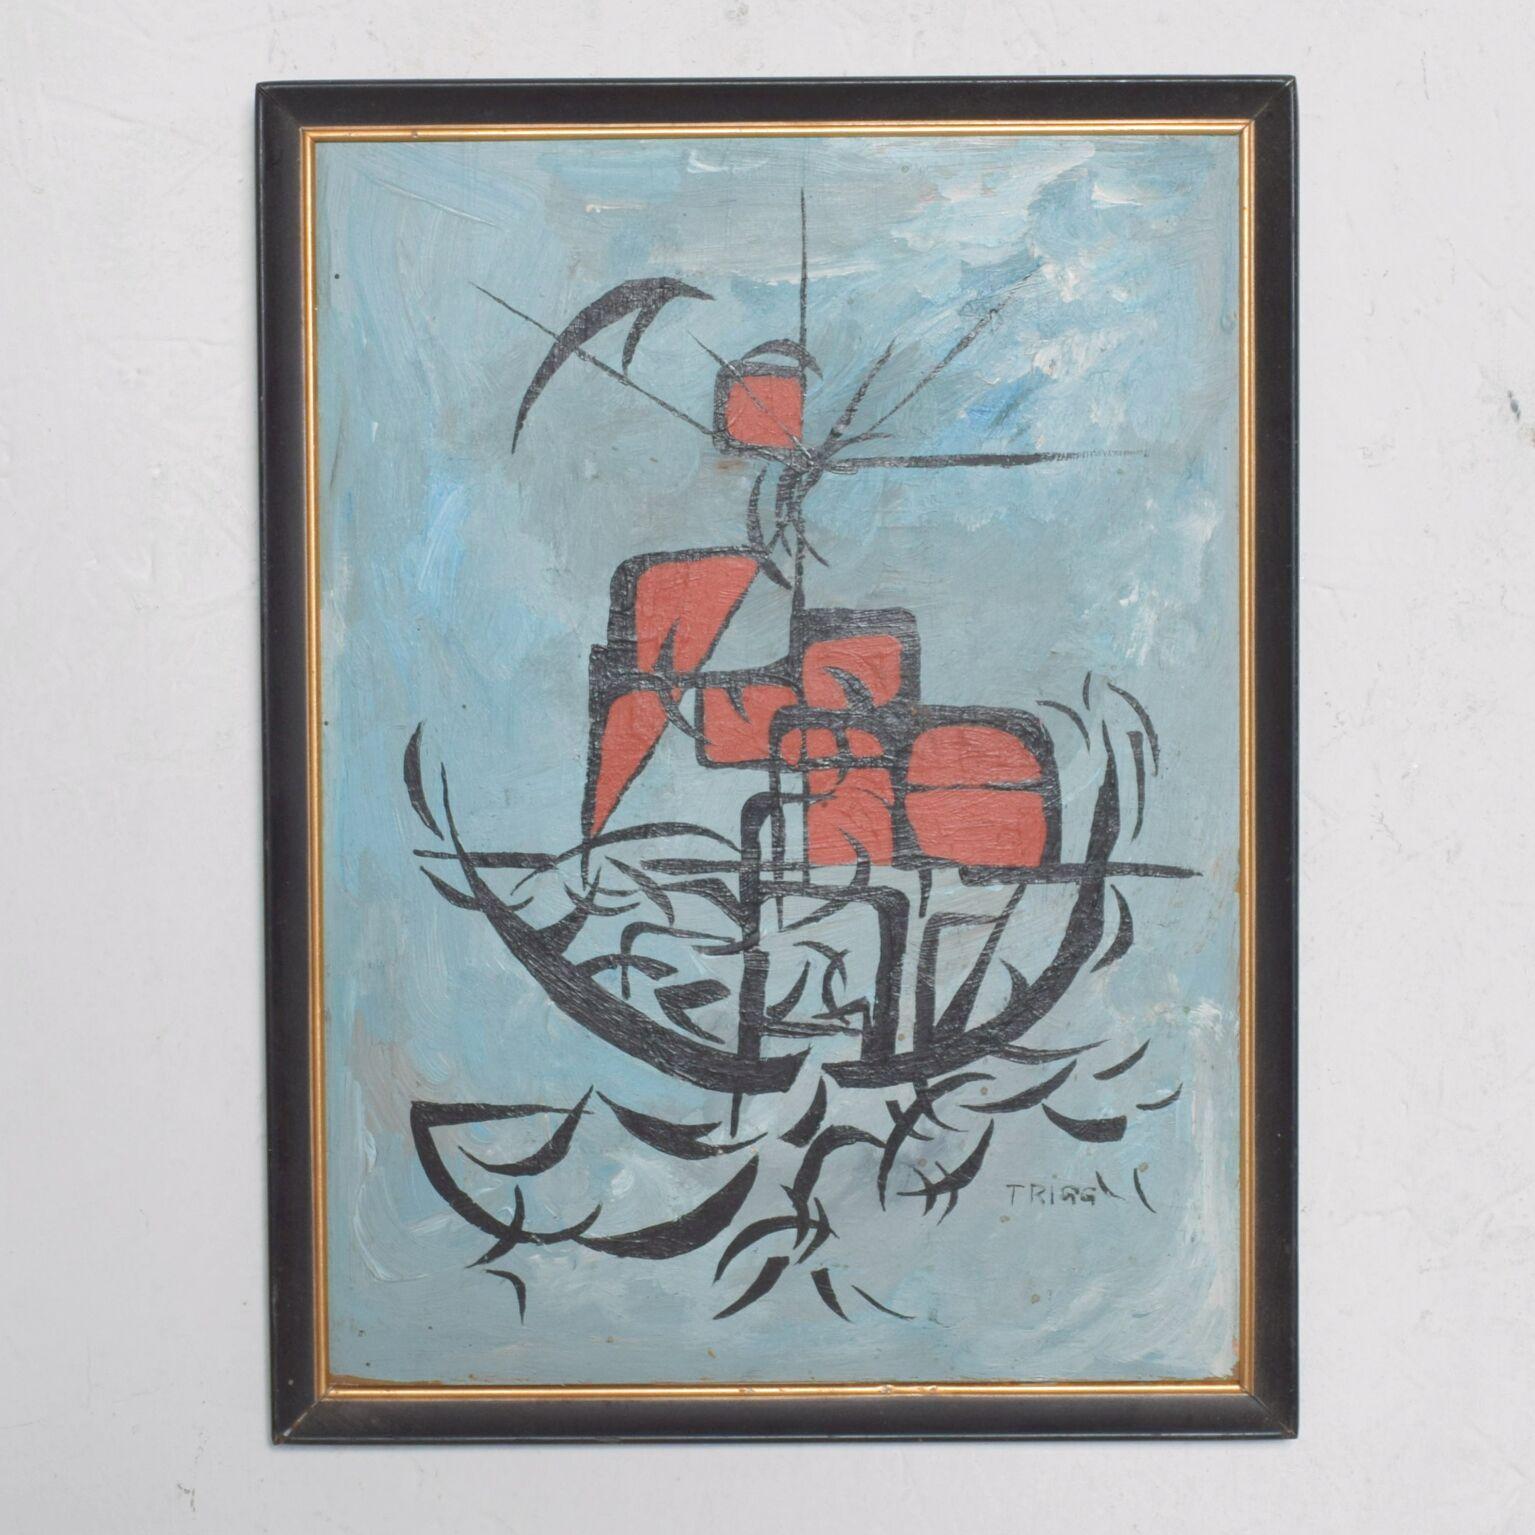 Mid Century Abstract Art Oil Painting Boat -1960s 
Dimensions: 9.25